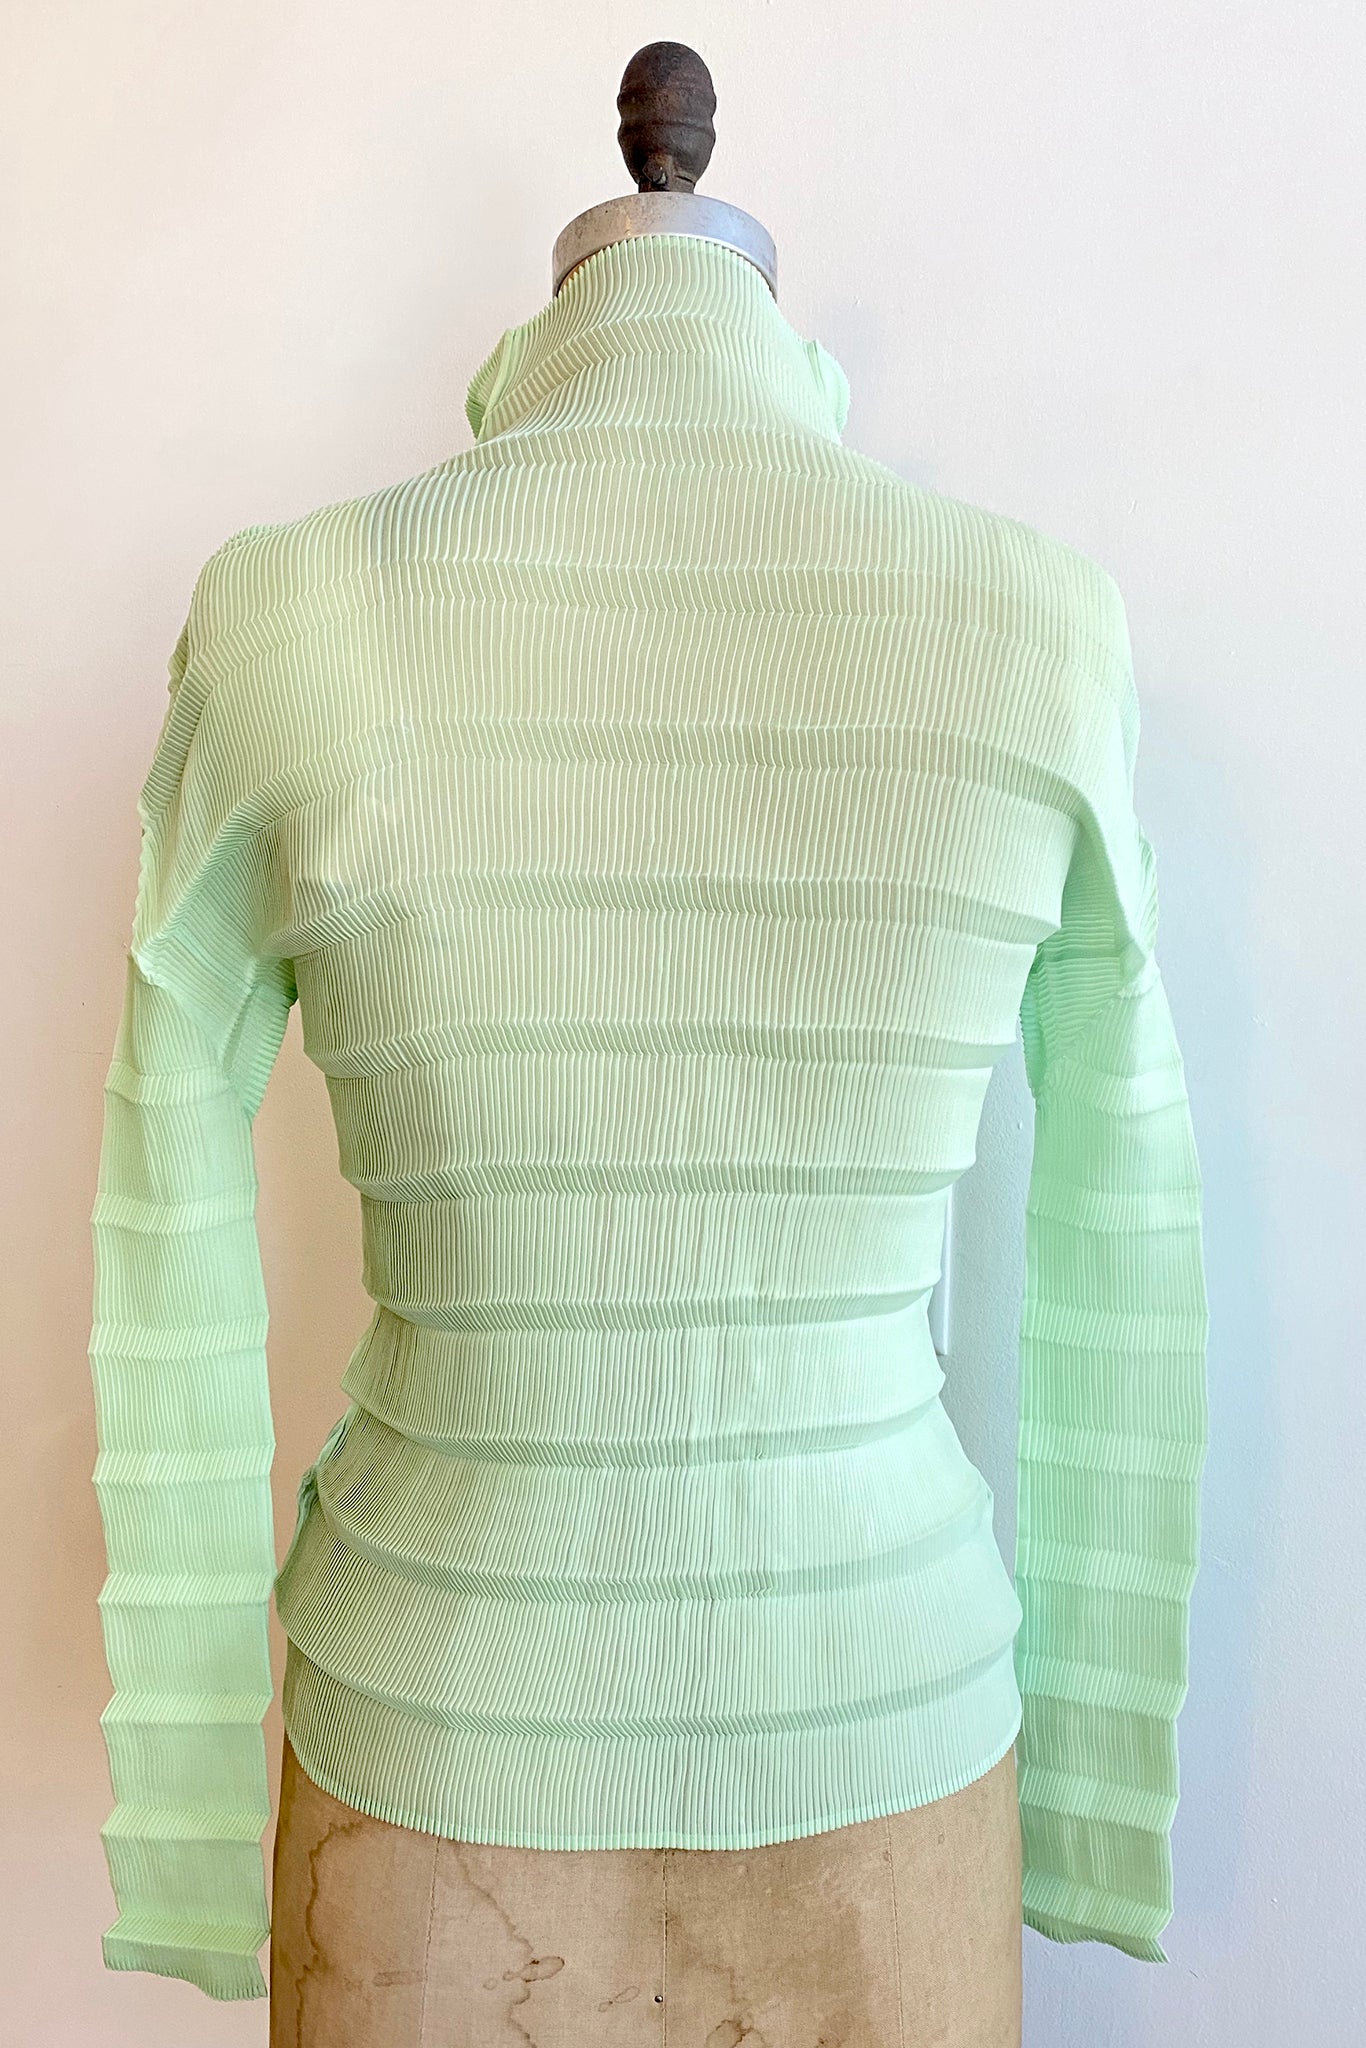 Vintage Issey Miyake Horizontal Pleated Blouse on Mannequin back at Recess Los Angeles